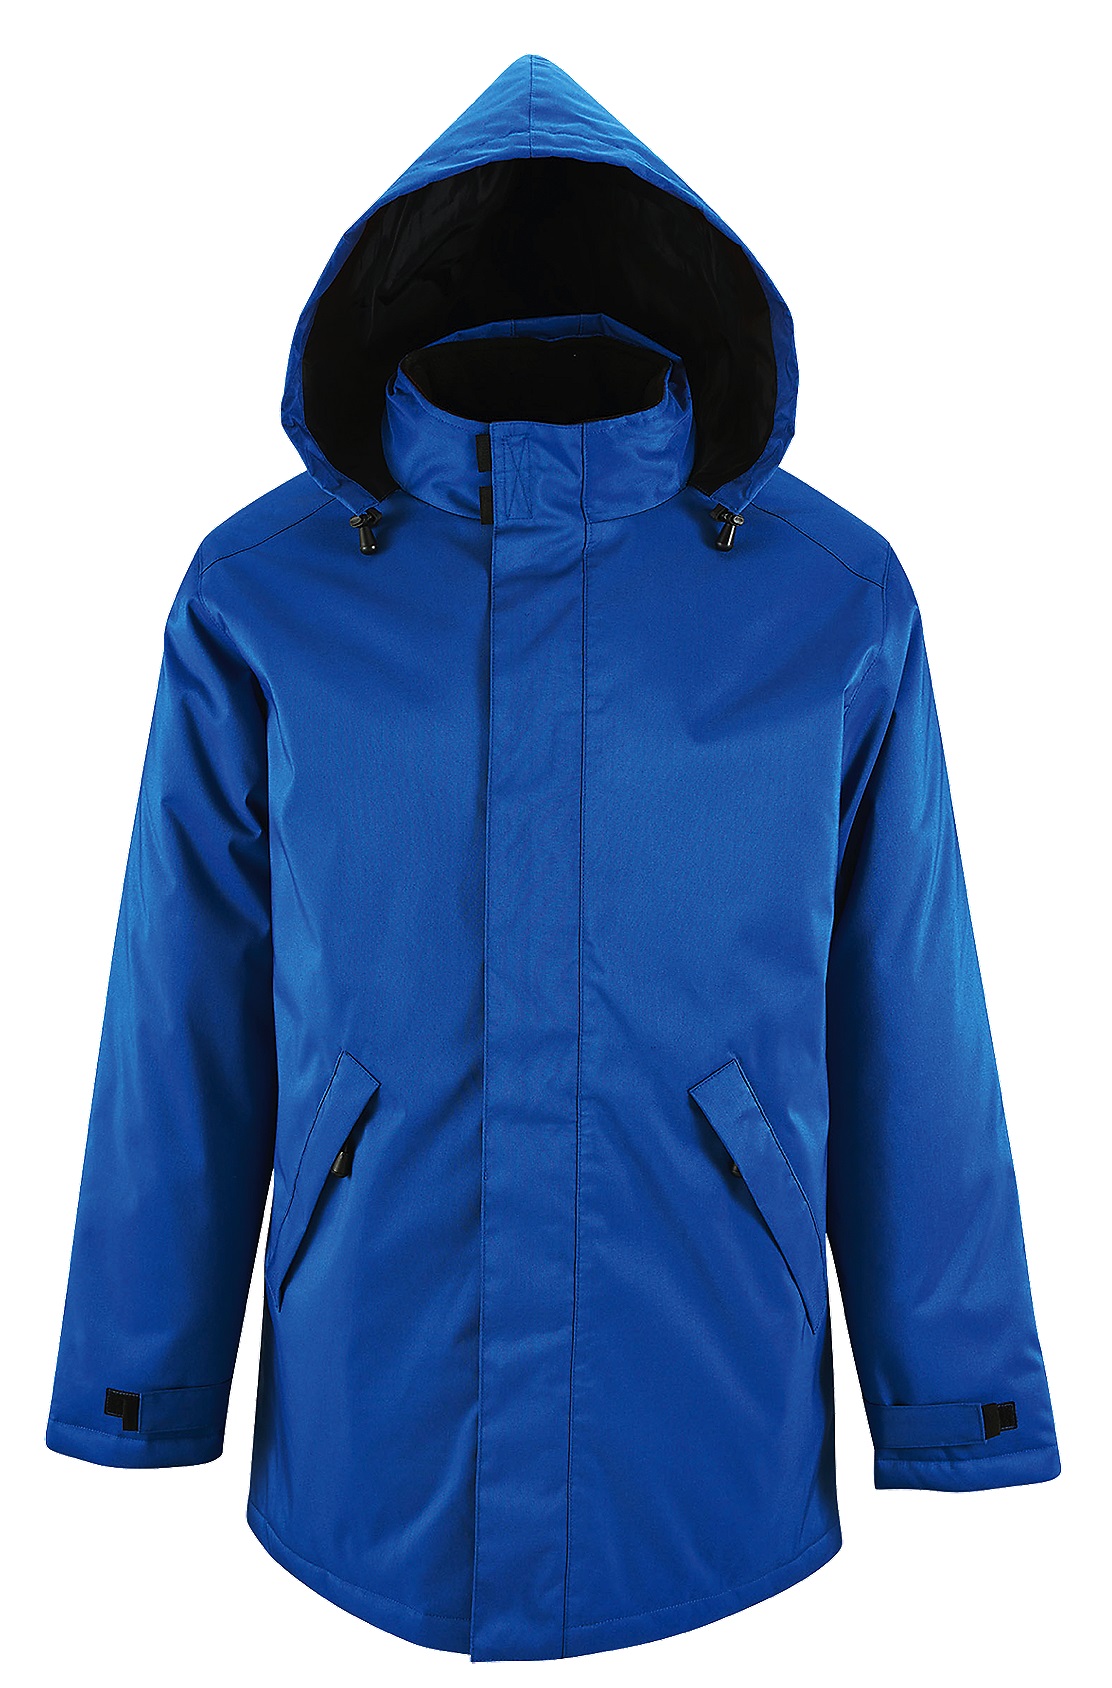 Unisex Jacket With Padded Lining Robyn L02109